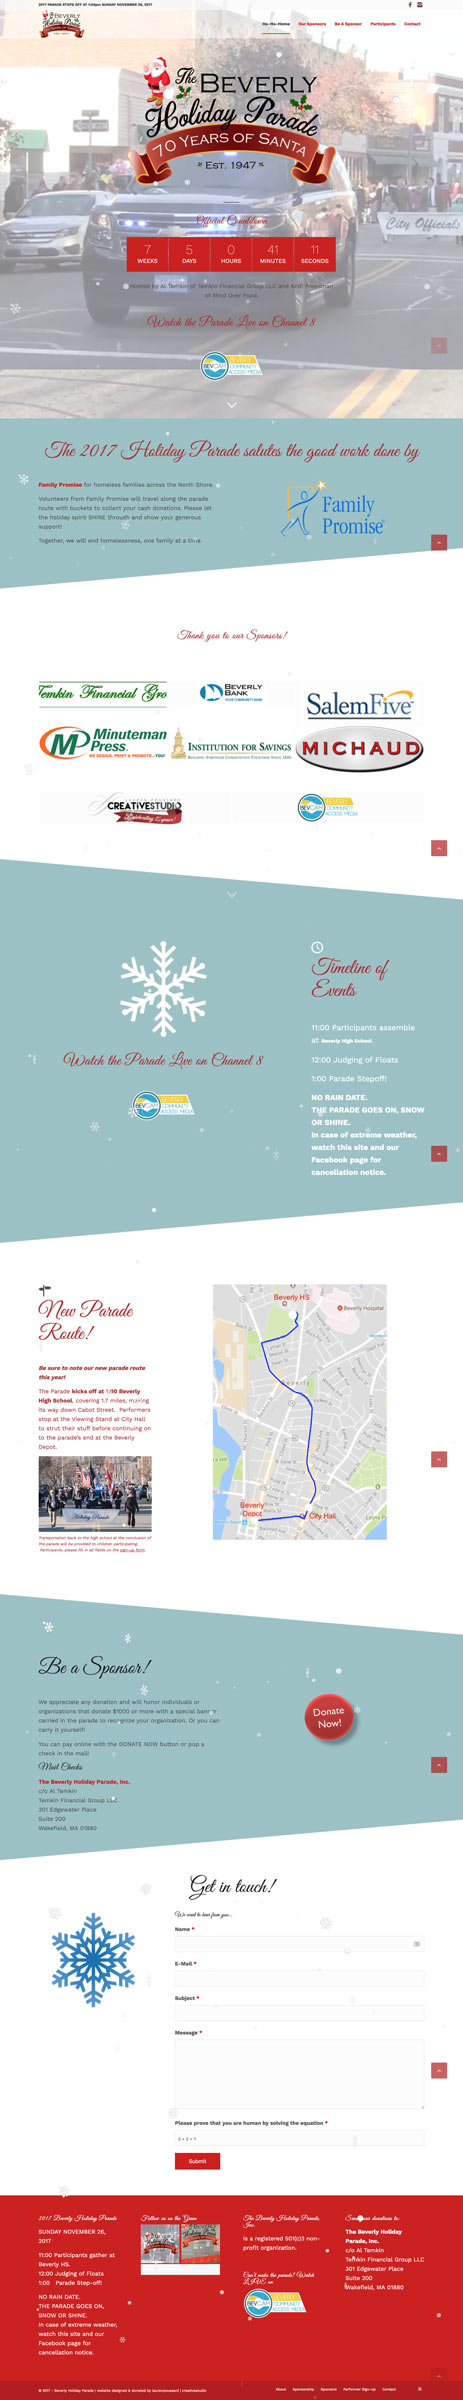 New Website for Beverly Holiday Parade by LPCS Websites Danvers